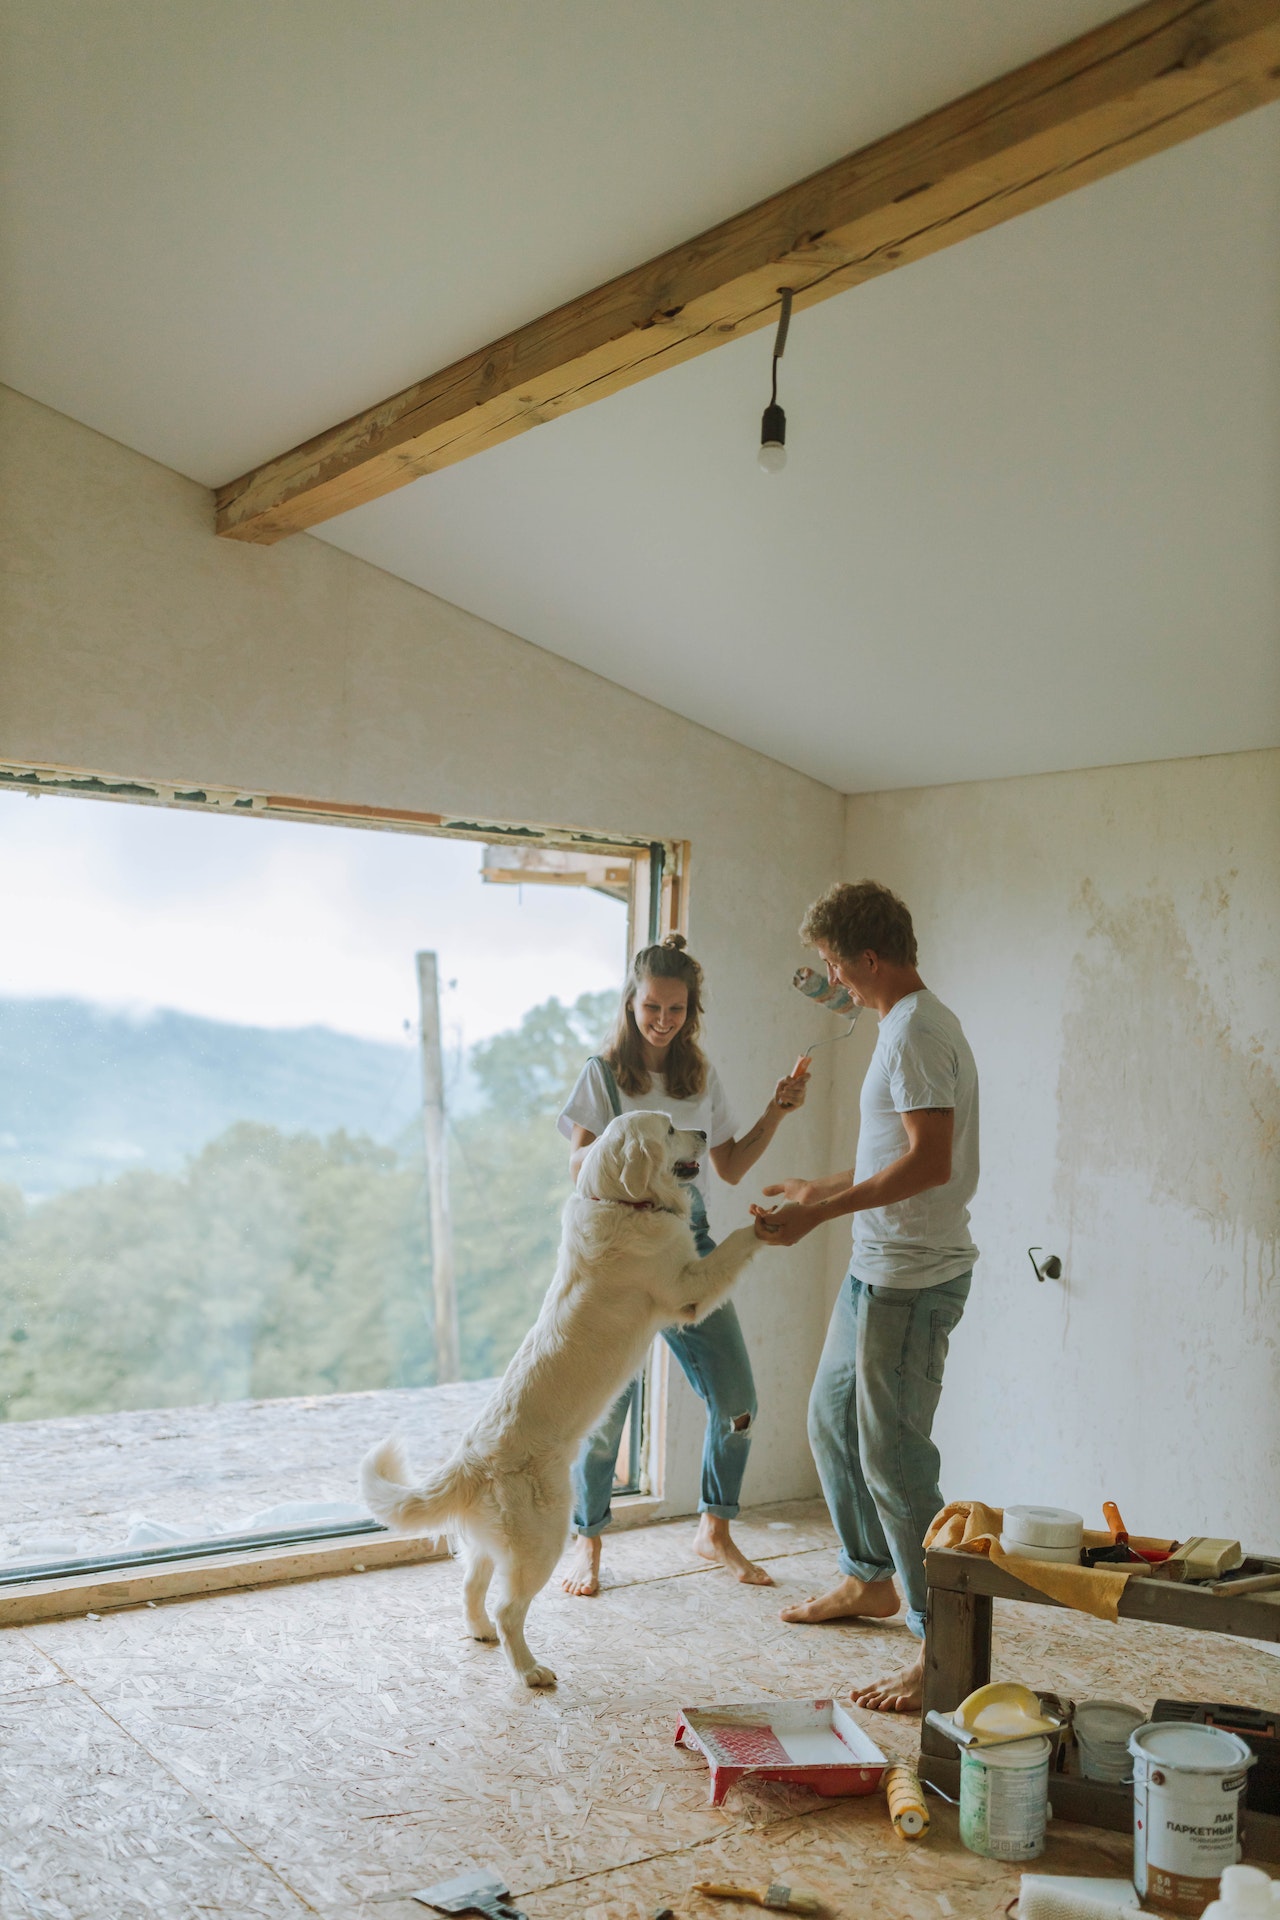 Man and woman playing with their dog during renovation